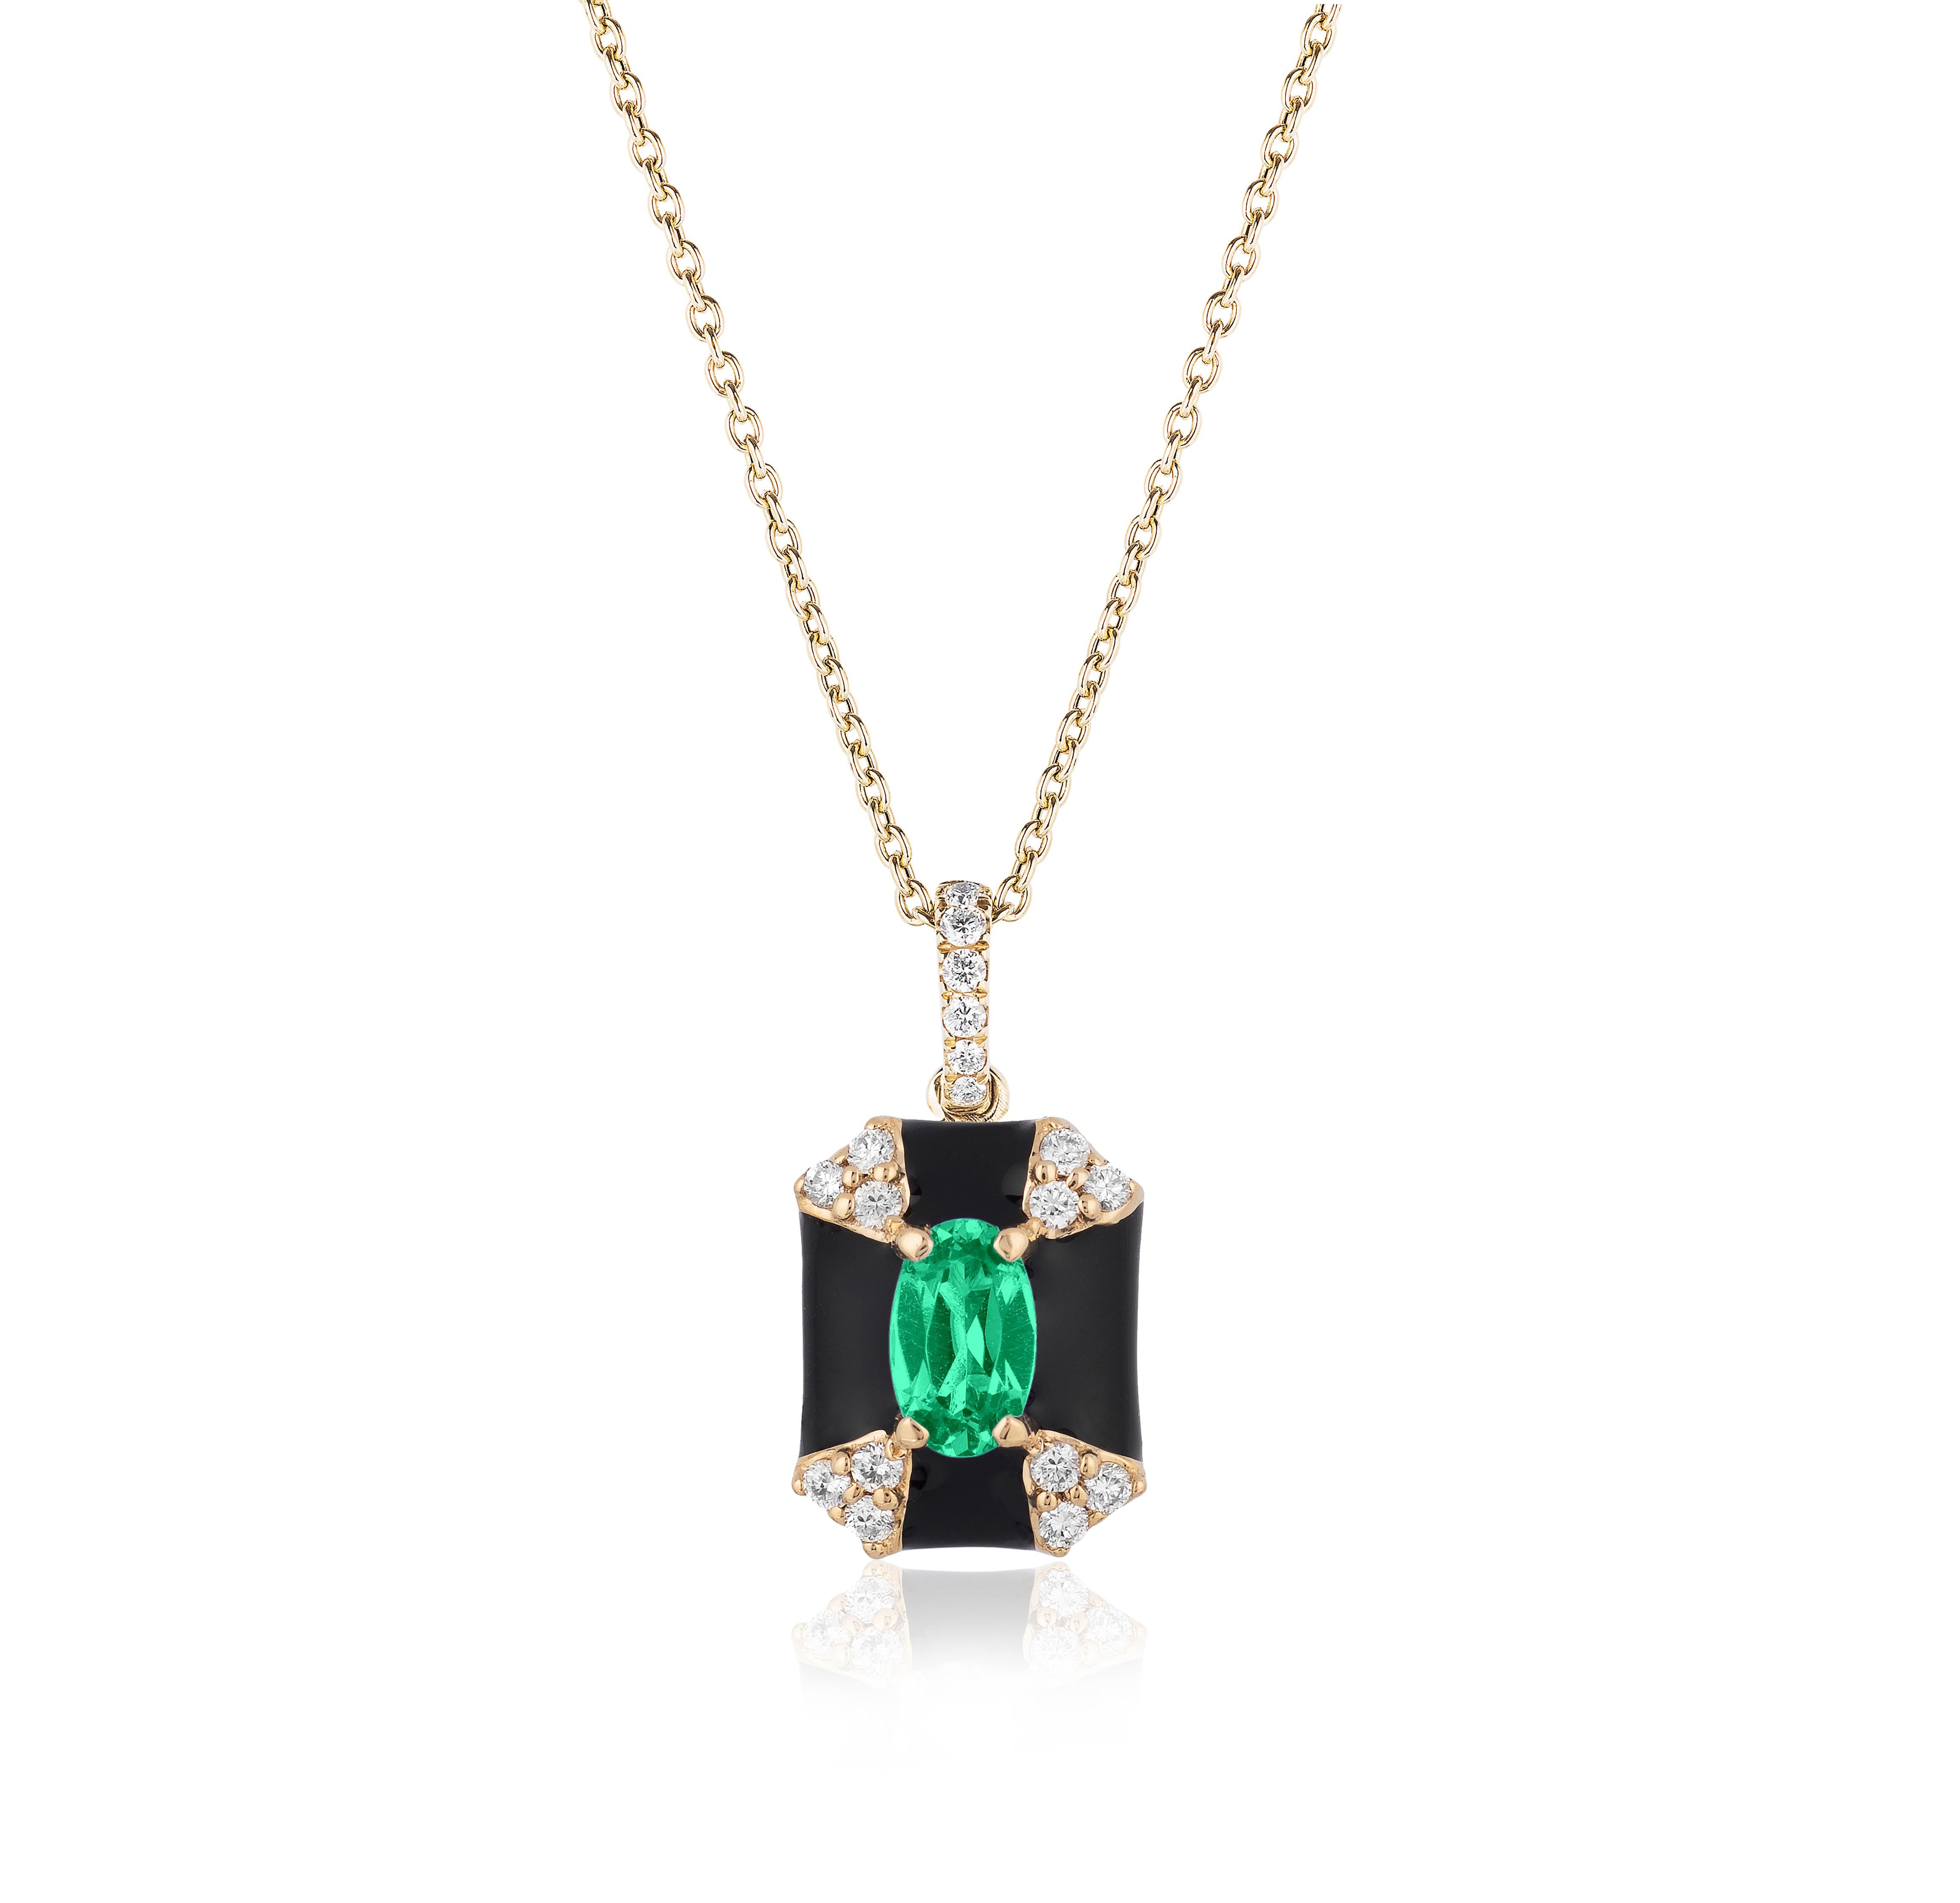 'Queen' Octagon Black Enamel Pendant with Emerald and Diamonds in 18K Yellow Gold.
Stone Size: 4 mm 
Gemstone Approx Wt: Emerald- 0.21 Carats 
Diamonds: G-H / VS, Approx. Wt: 0.10 Carats